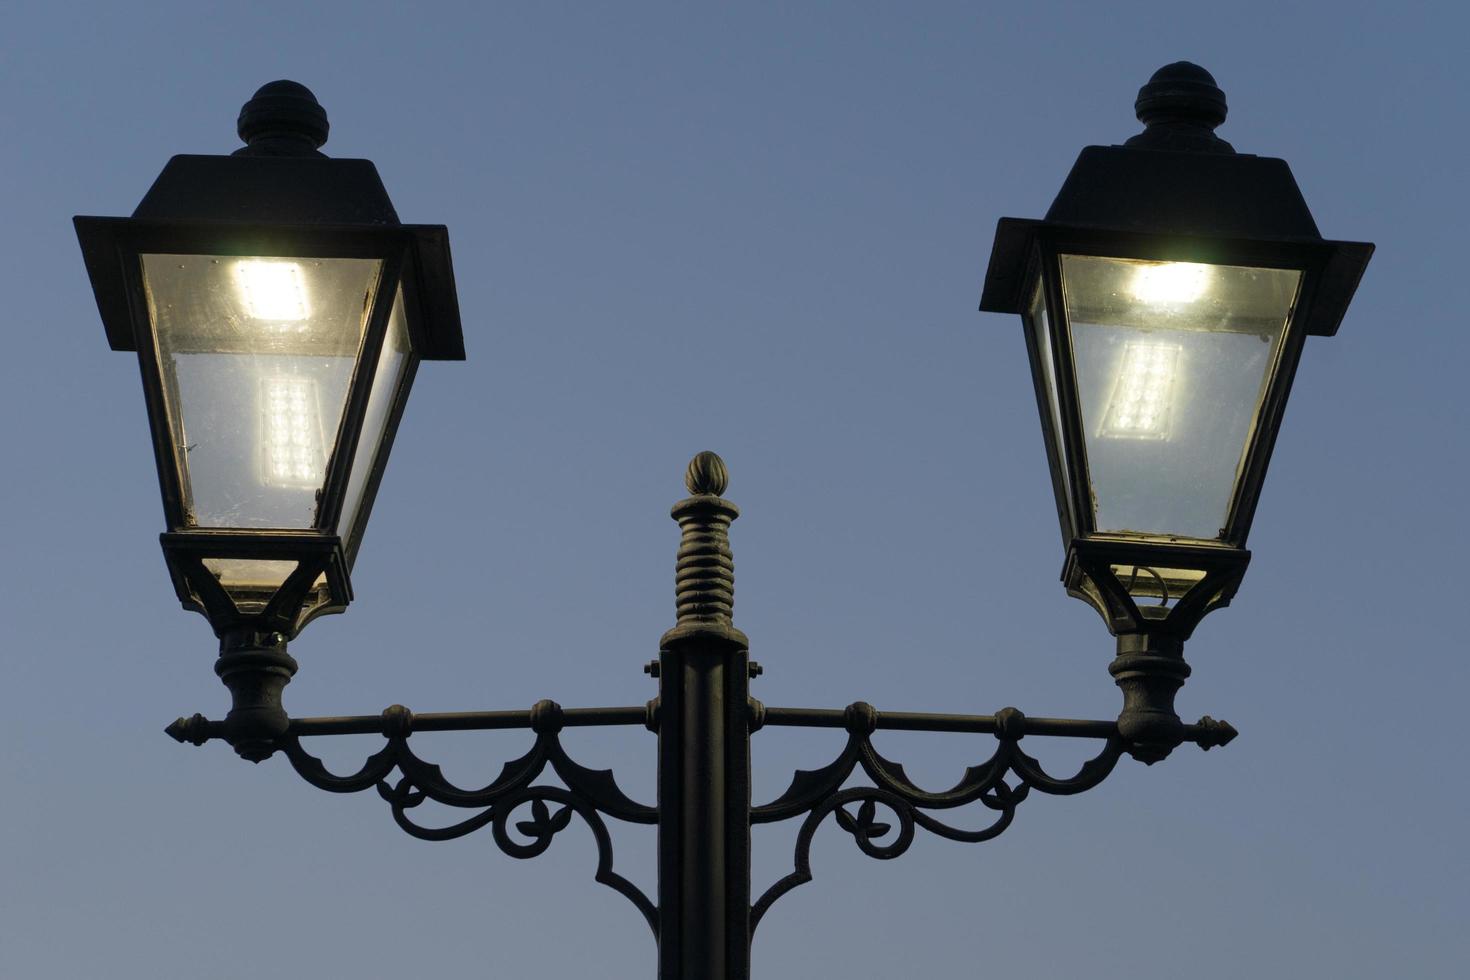 electric lights in antique style with Sochi's promenade in the evening photo